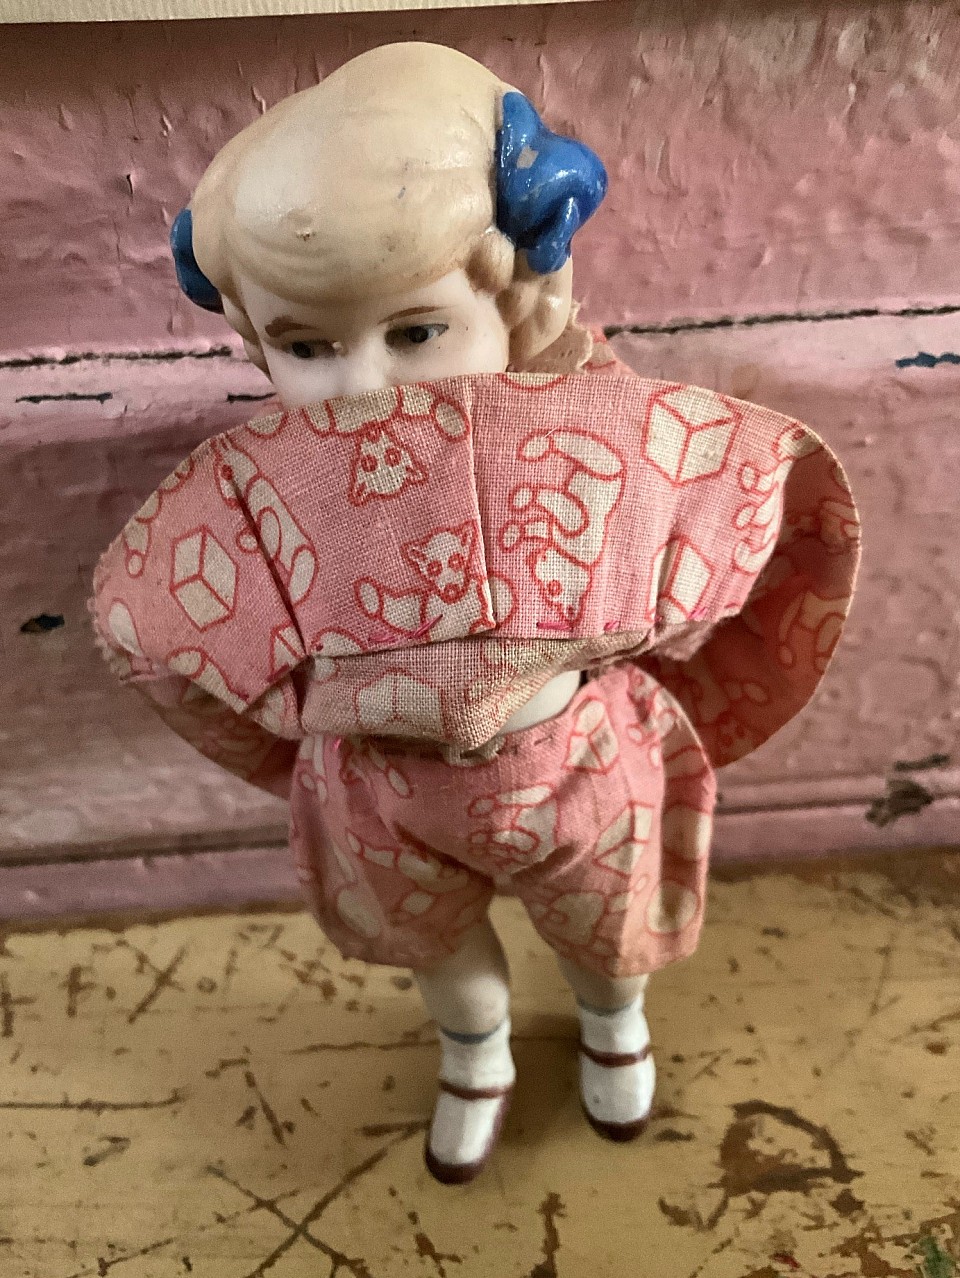 5  1/2” Antique all bisque girl with blue bows in hair. Made in Japan and wearing original pink dress & matching bloomers with teddy bear print. ~ sold